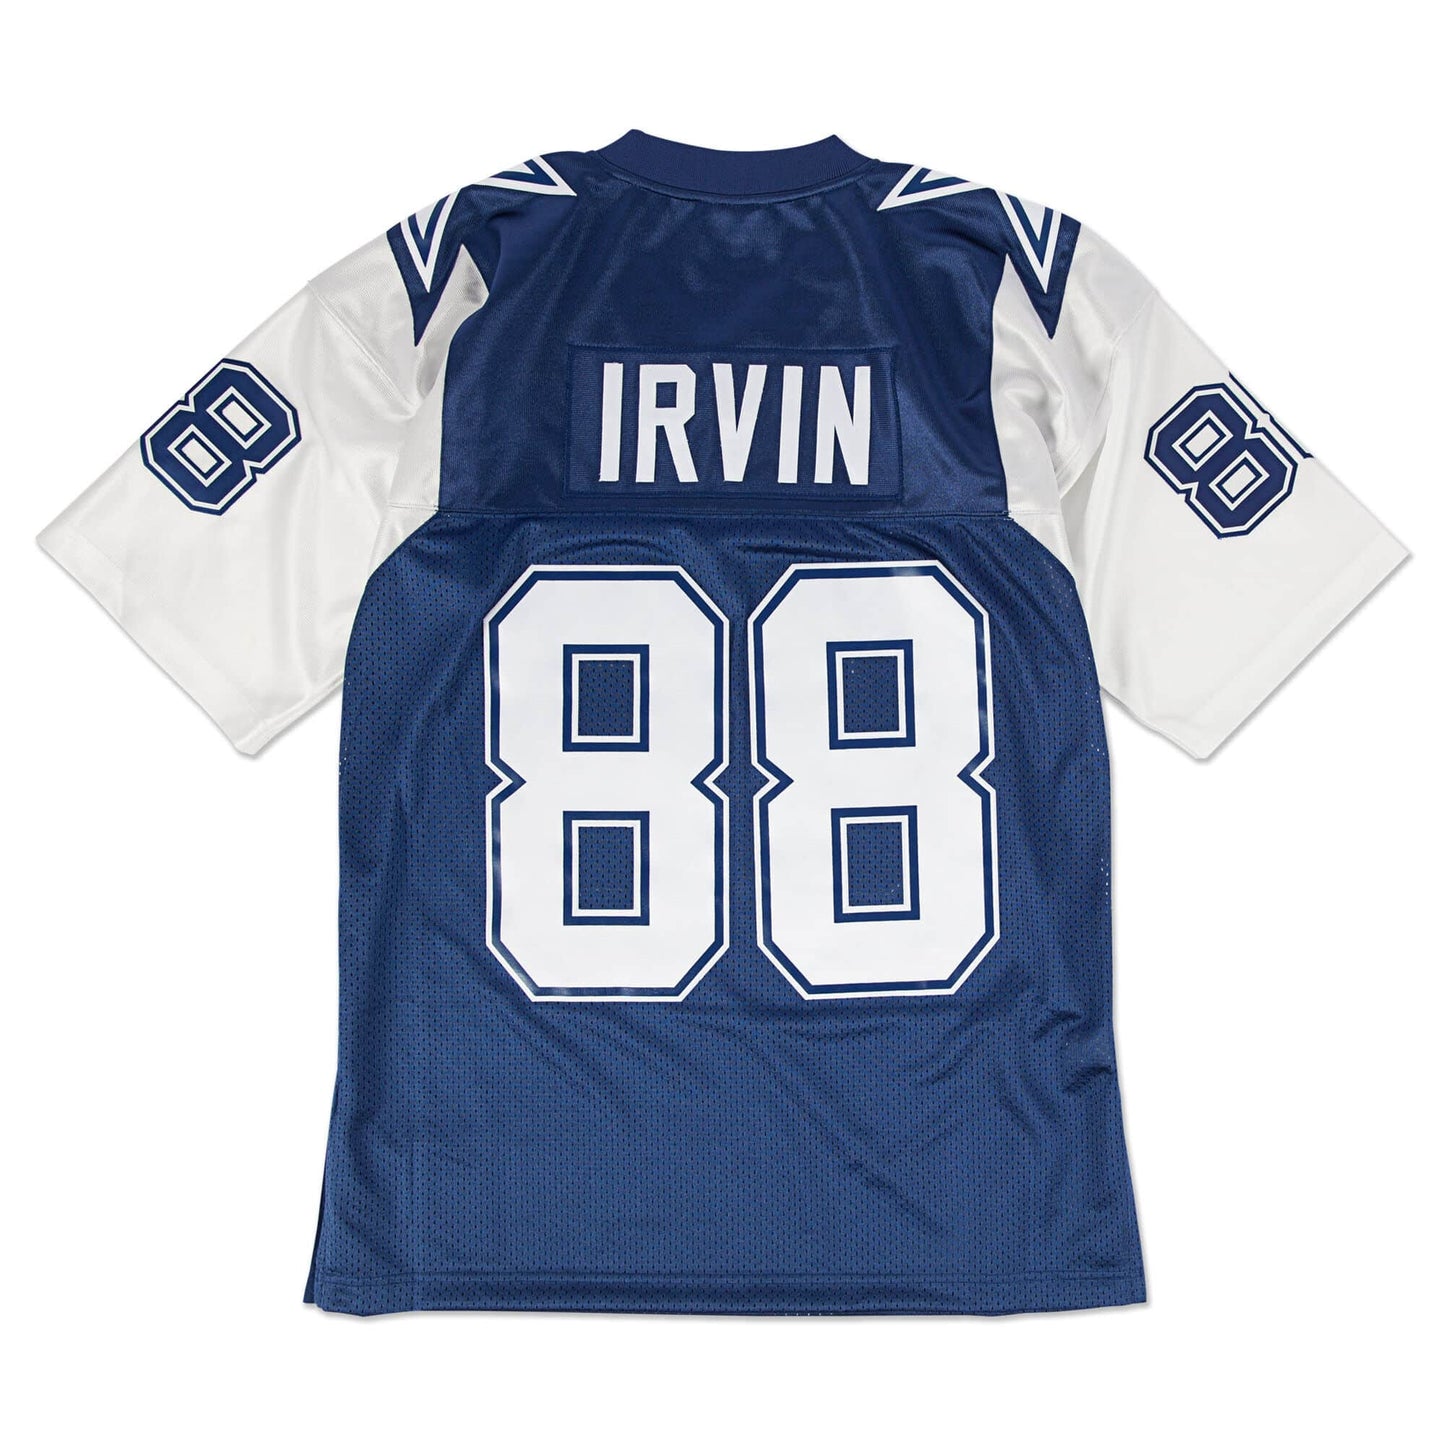 Authentic Jersey Dallas Cowboys 1995 Michael Irvin  #88 - Broski Clothing